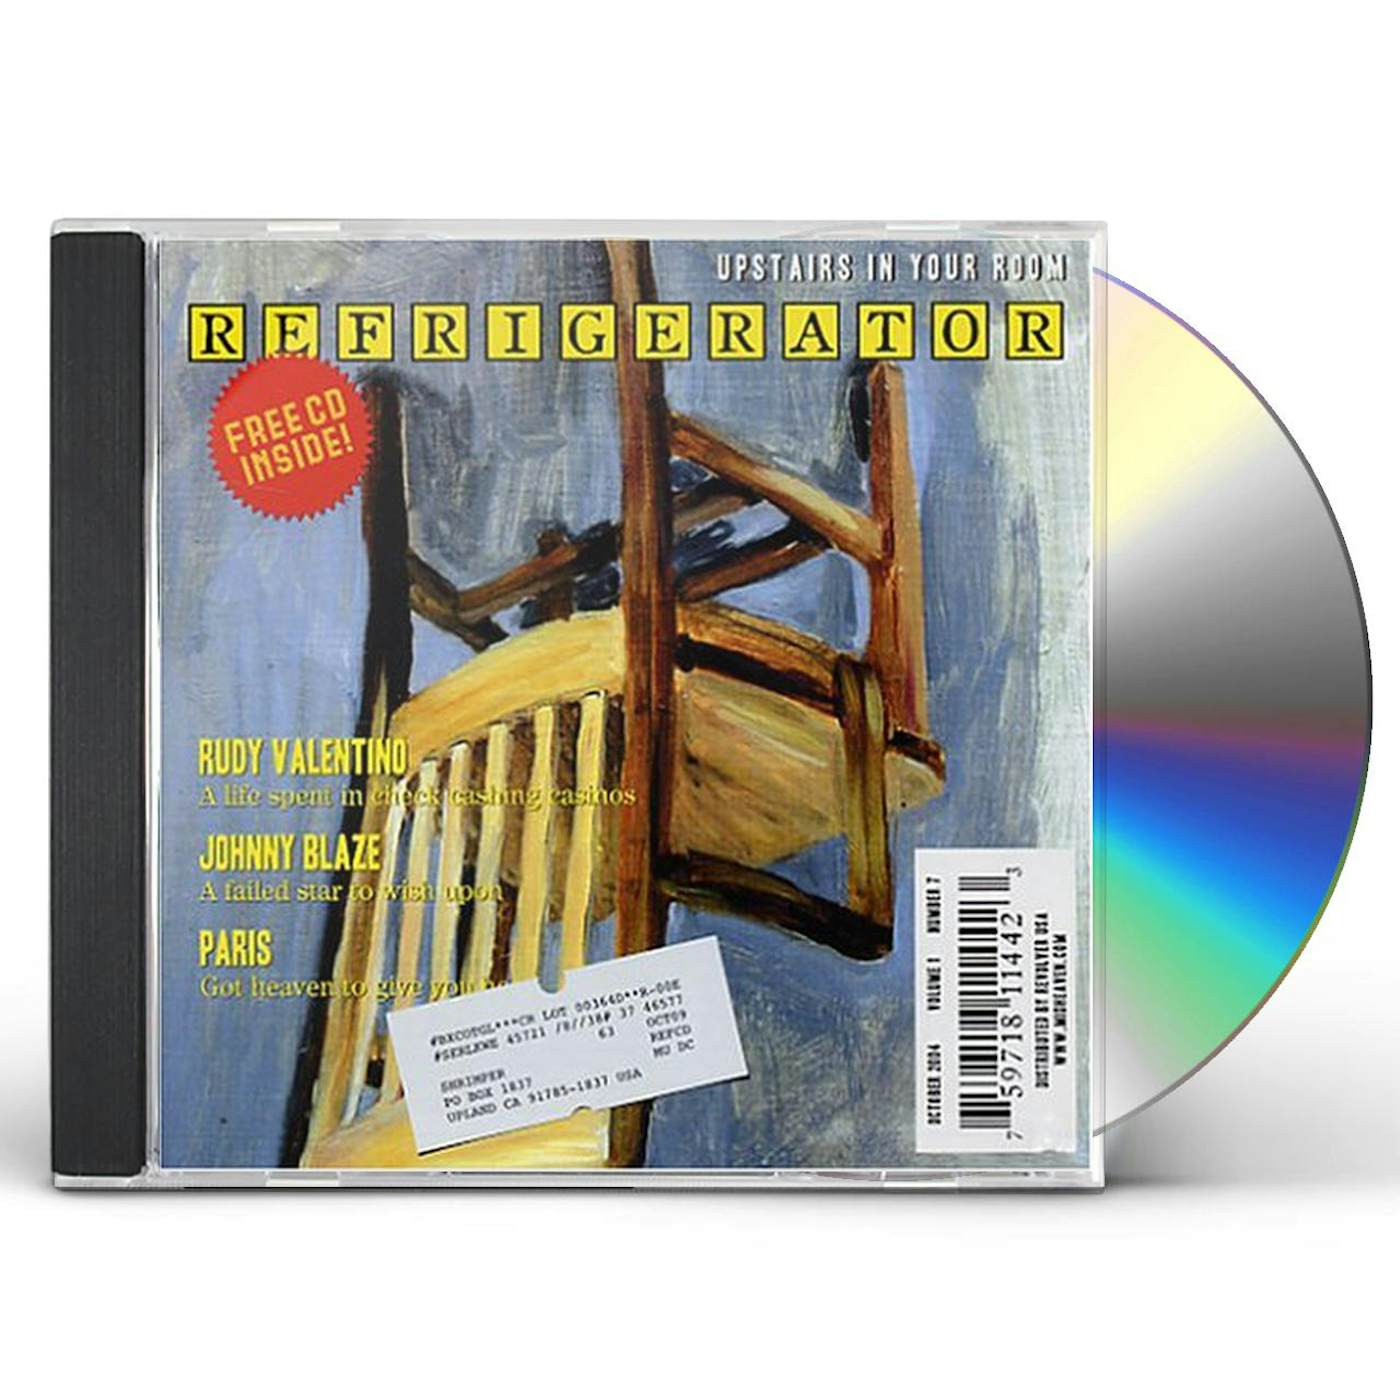 Refrigerator UPSTAIRS IN YOUR ROOM CD